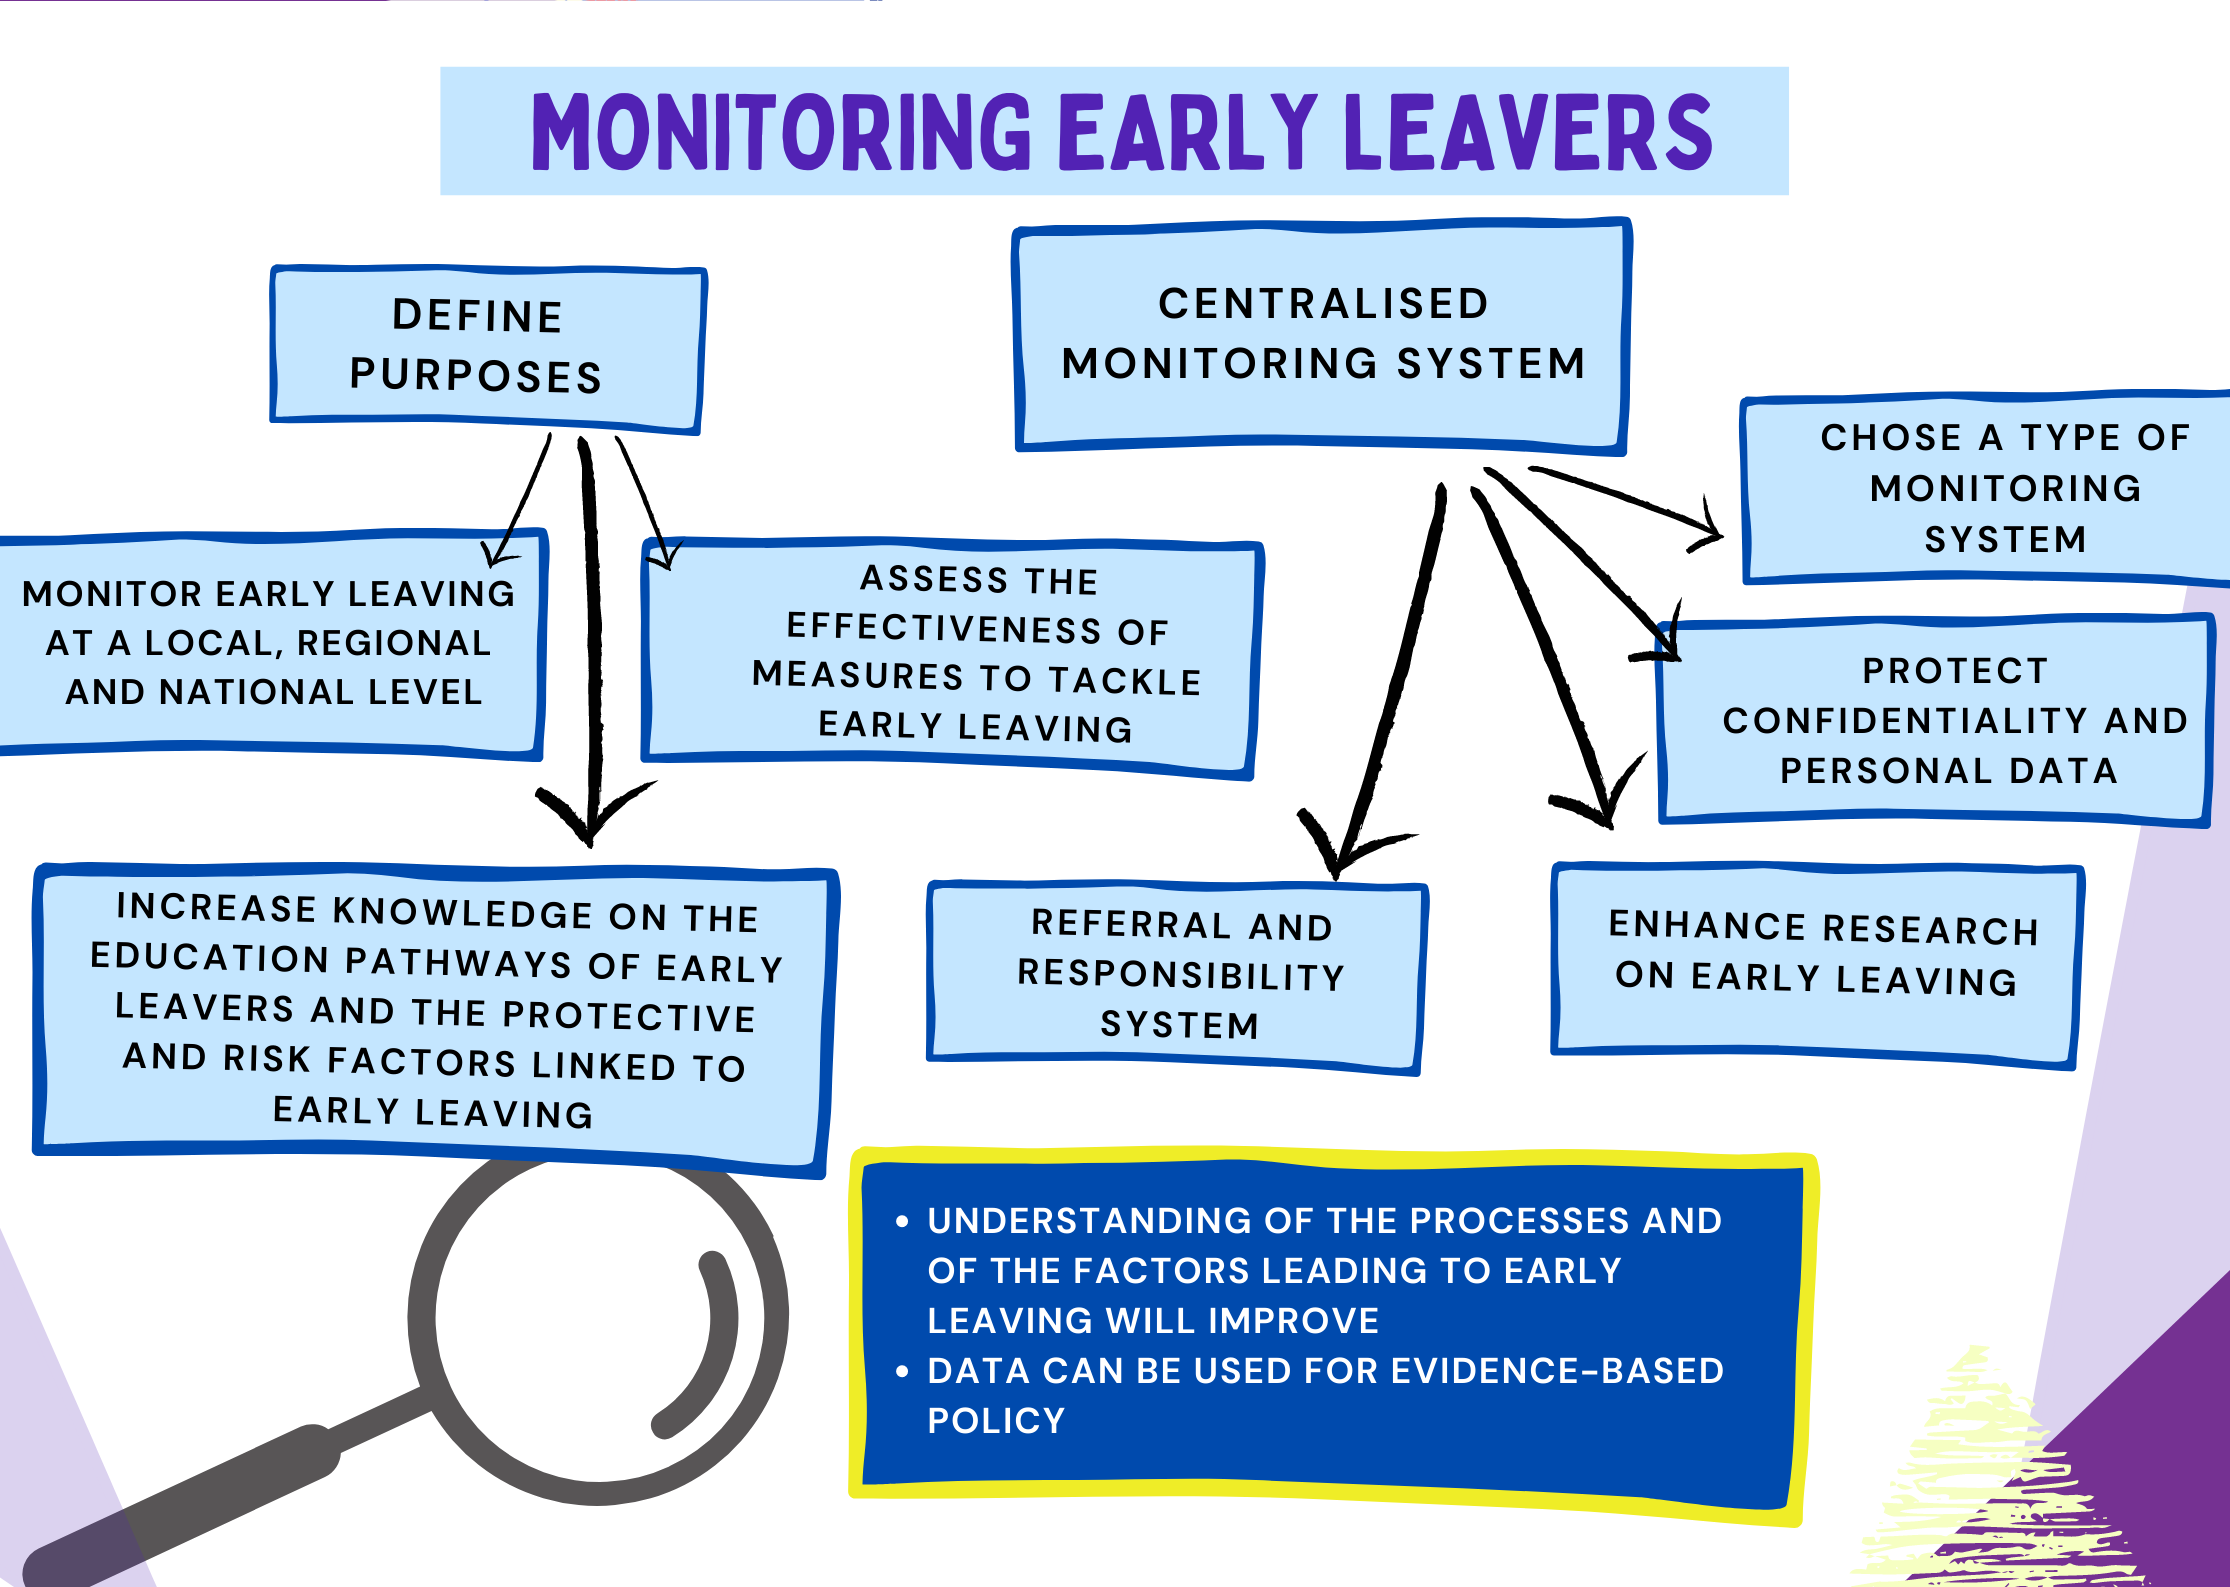 02_monitoring early leavers